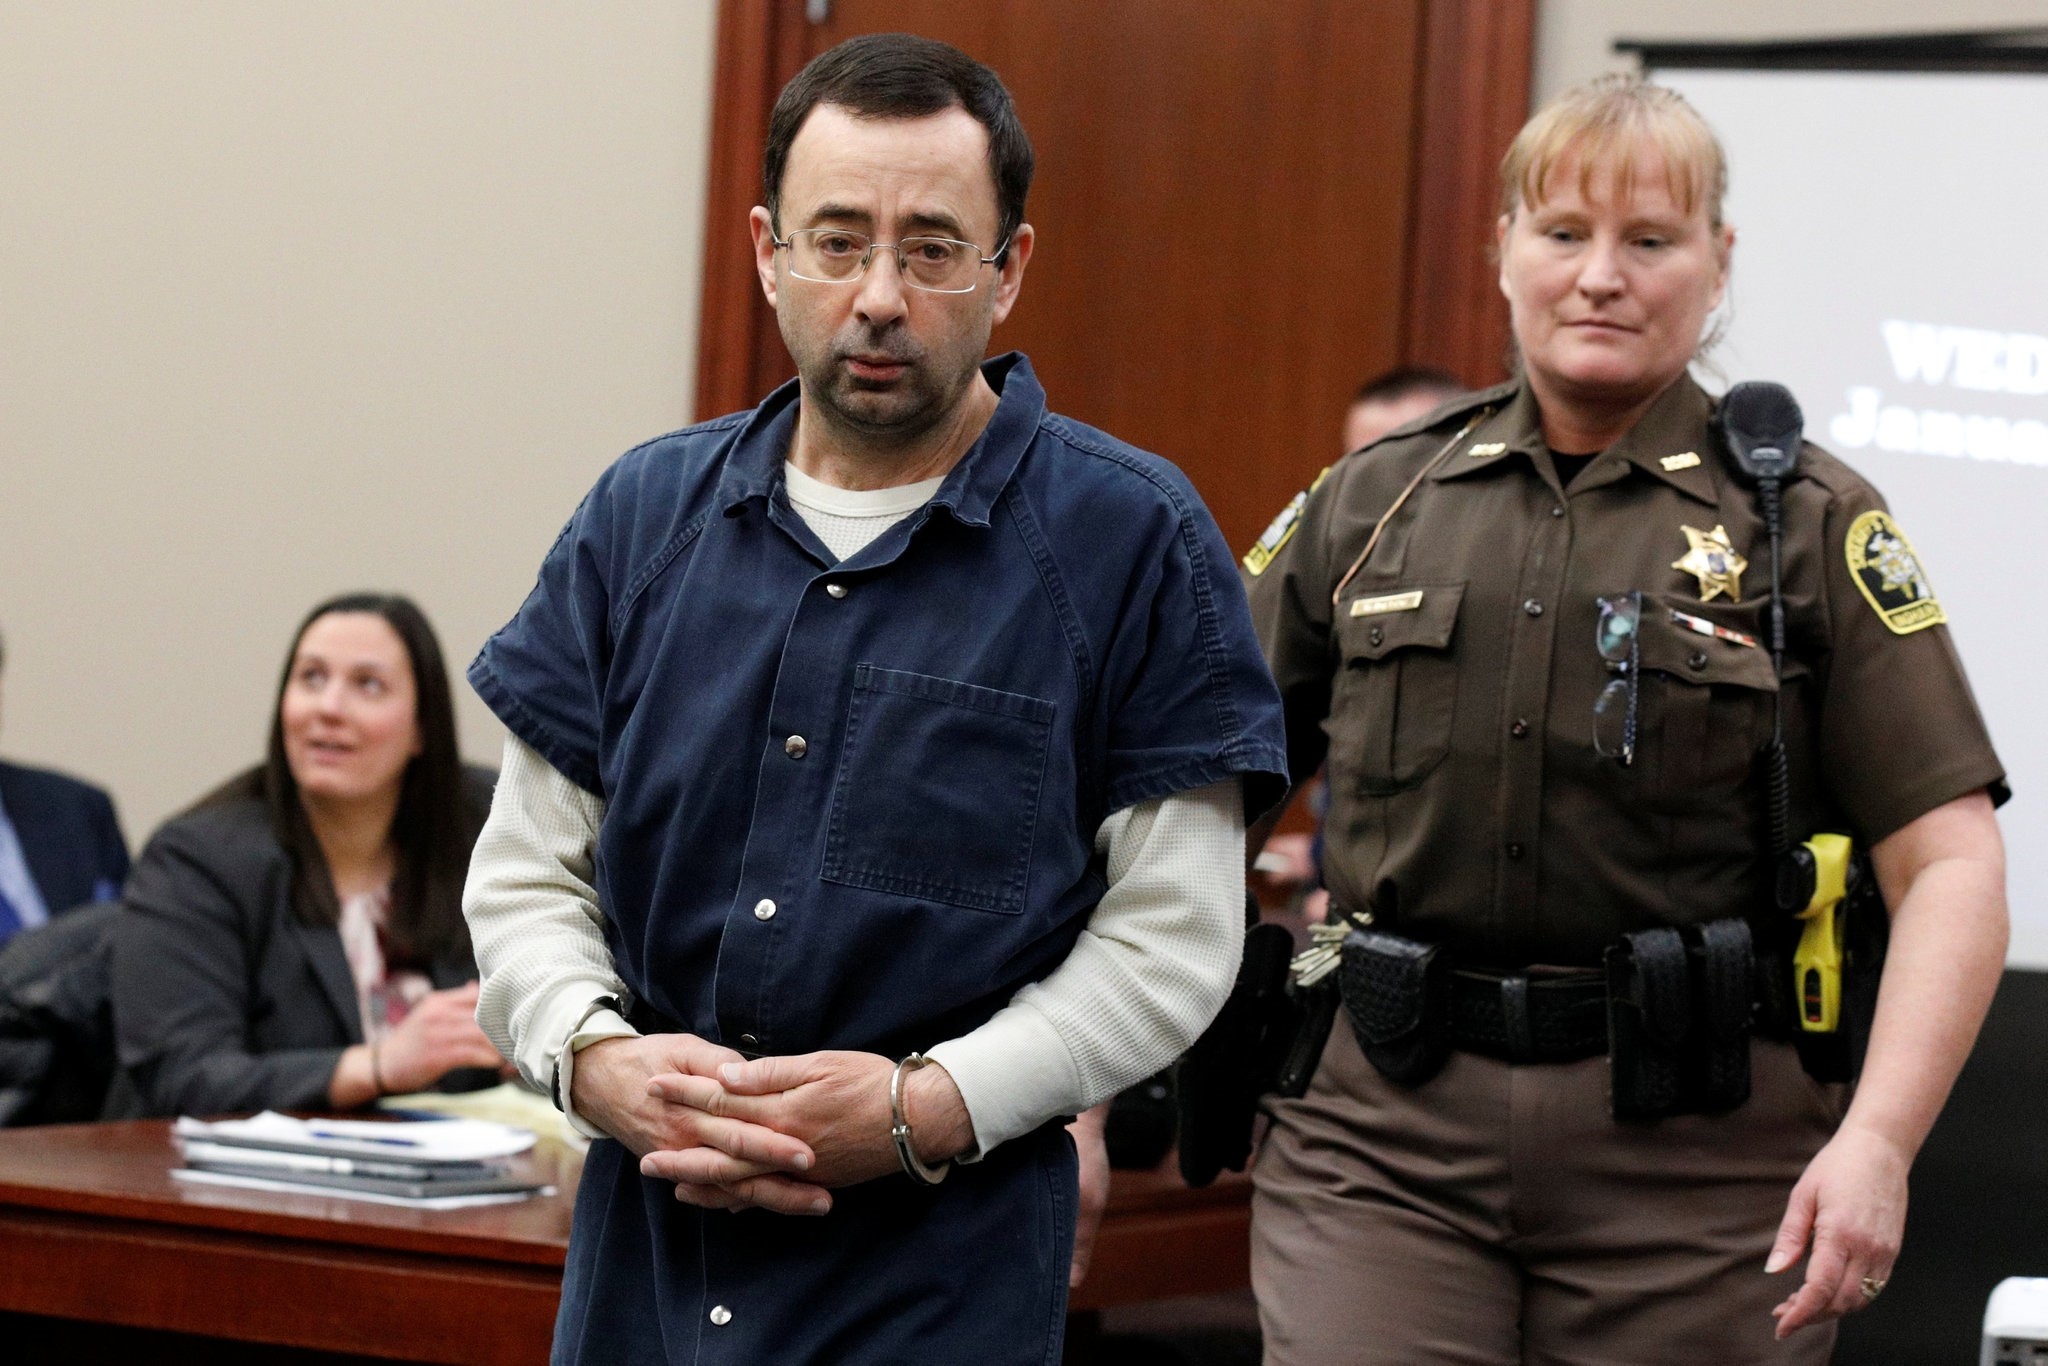 Larry Nassar, a former team USA Gymnastics doctor who pleaded guilty in November 2017 to sexual assault charges, is escorted by a court officer during his sentencing hearing in Lansing, Michigan, January 17, 2018. (REUTERS Photo)